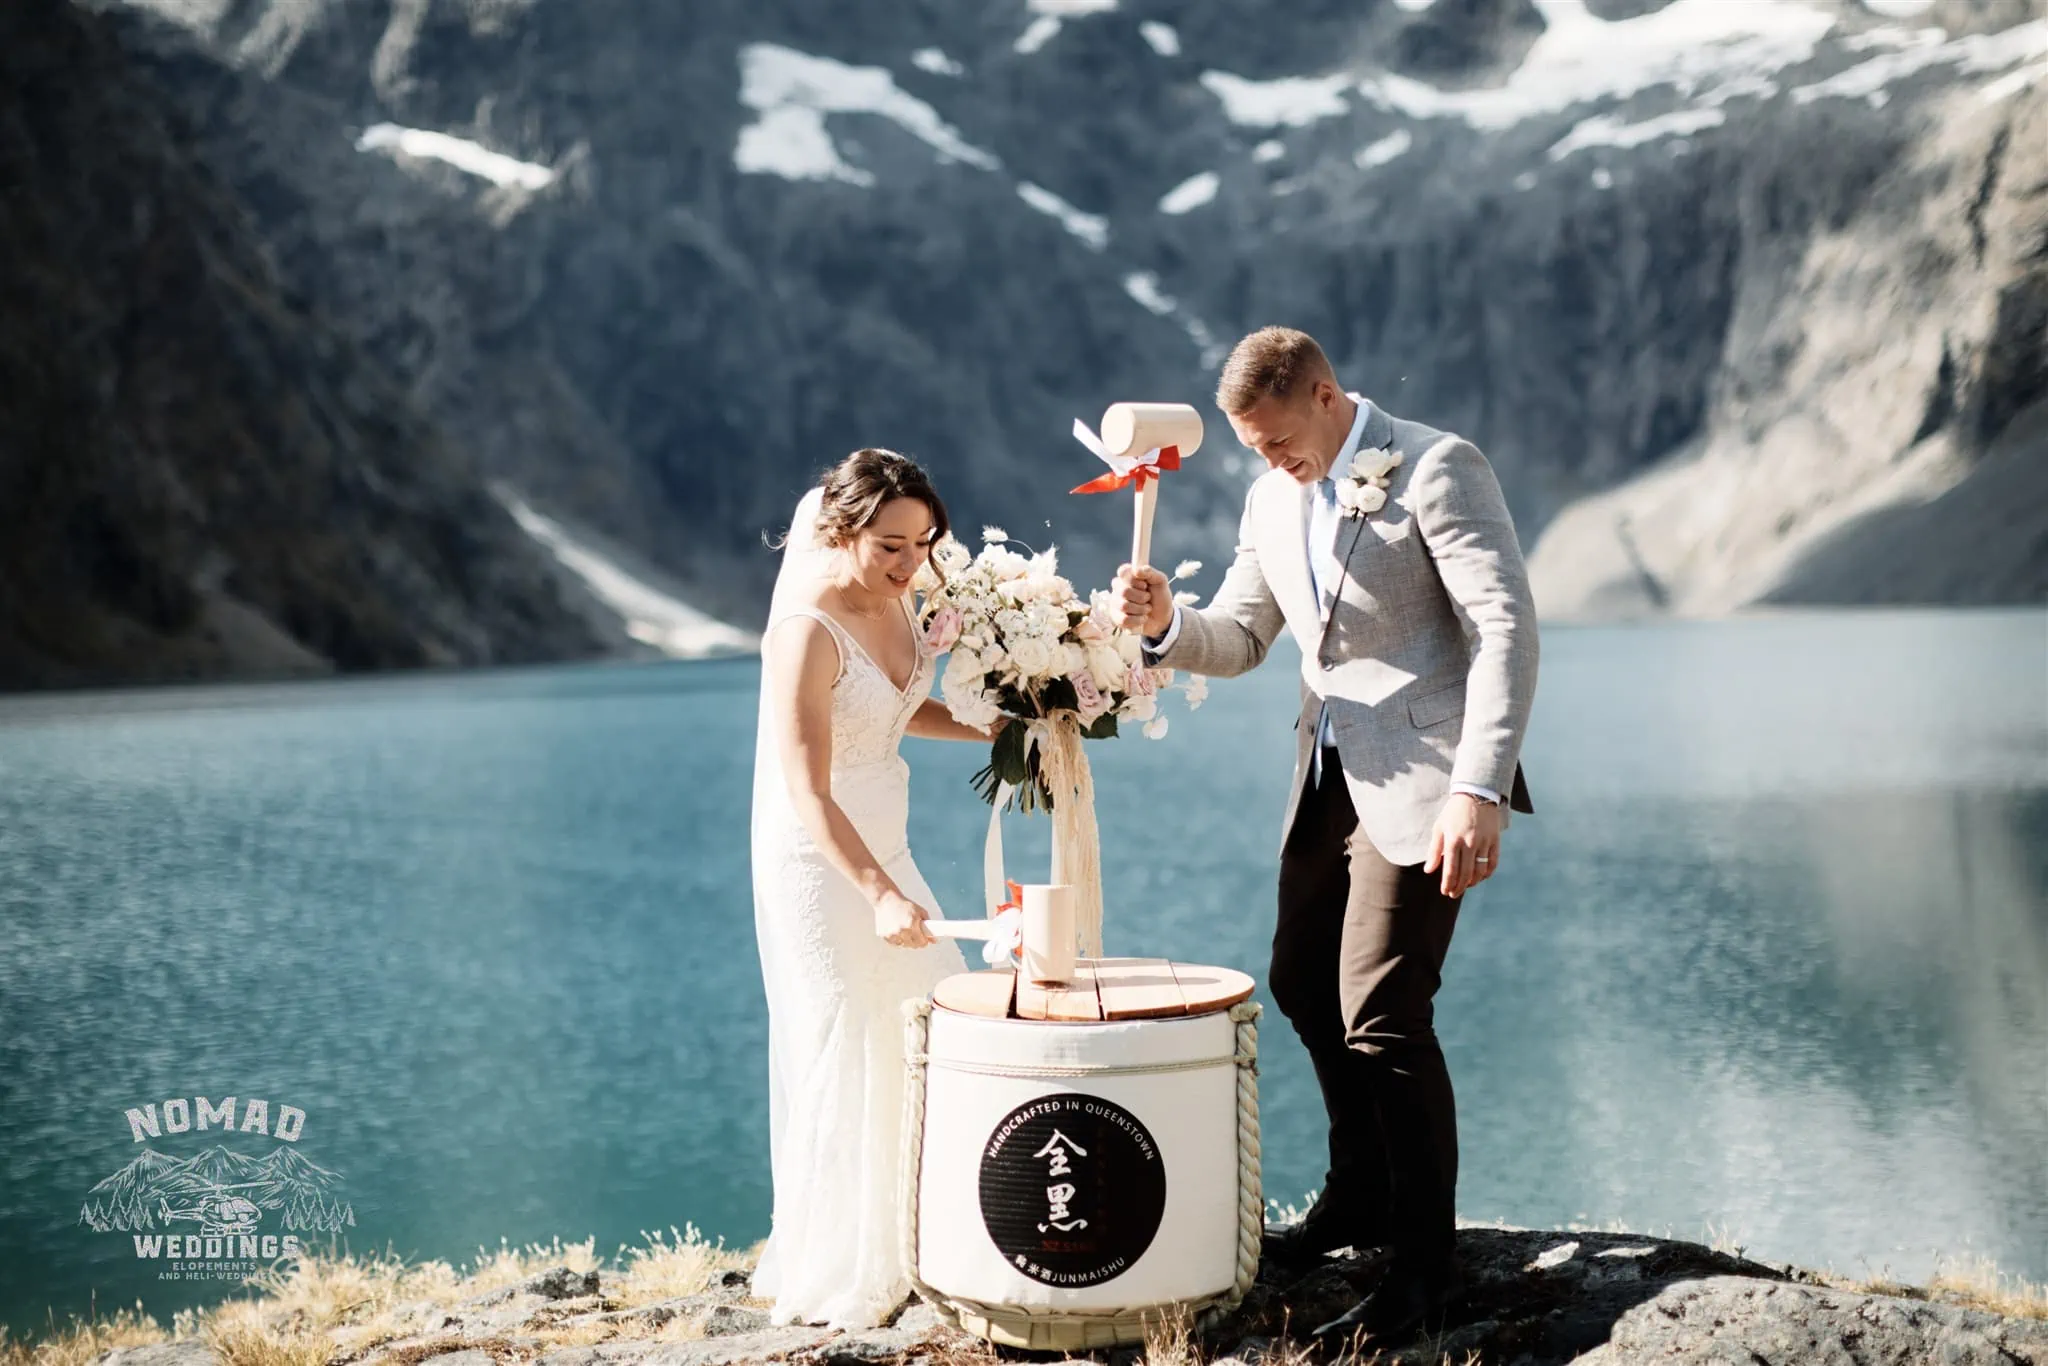 Enchanting Lake Erskine heli elopement wedding with Amy and Eden standing in front of a lake with mountains in the background.